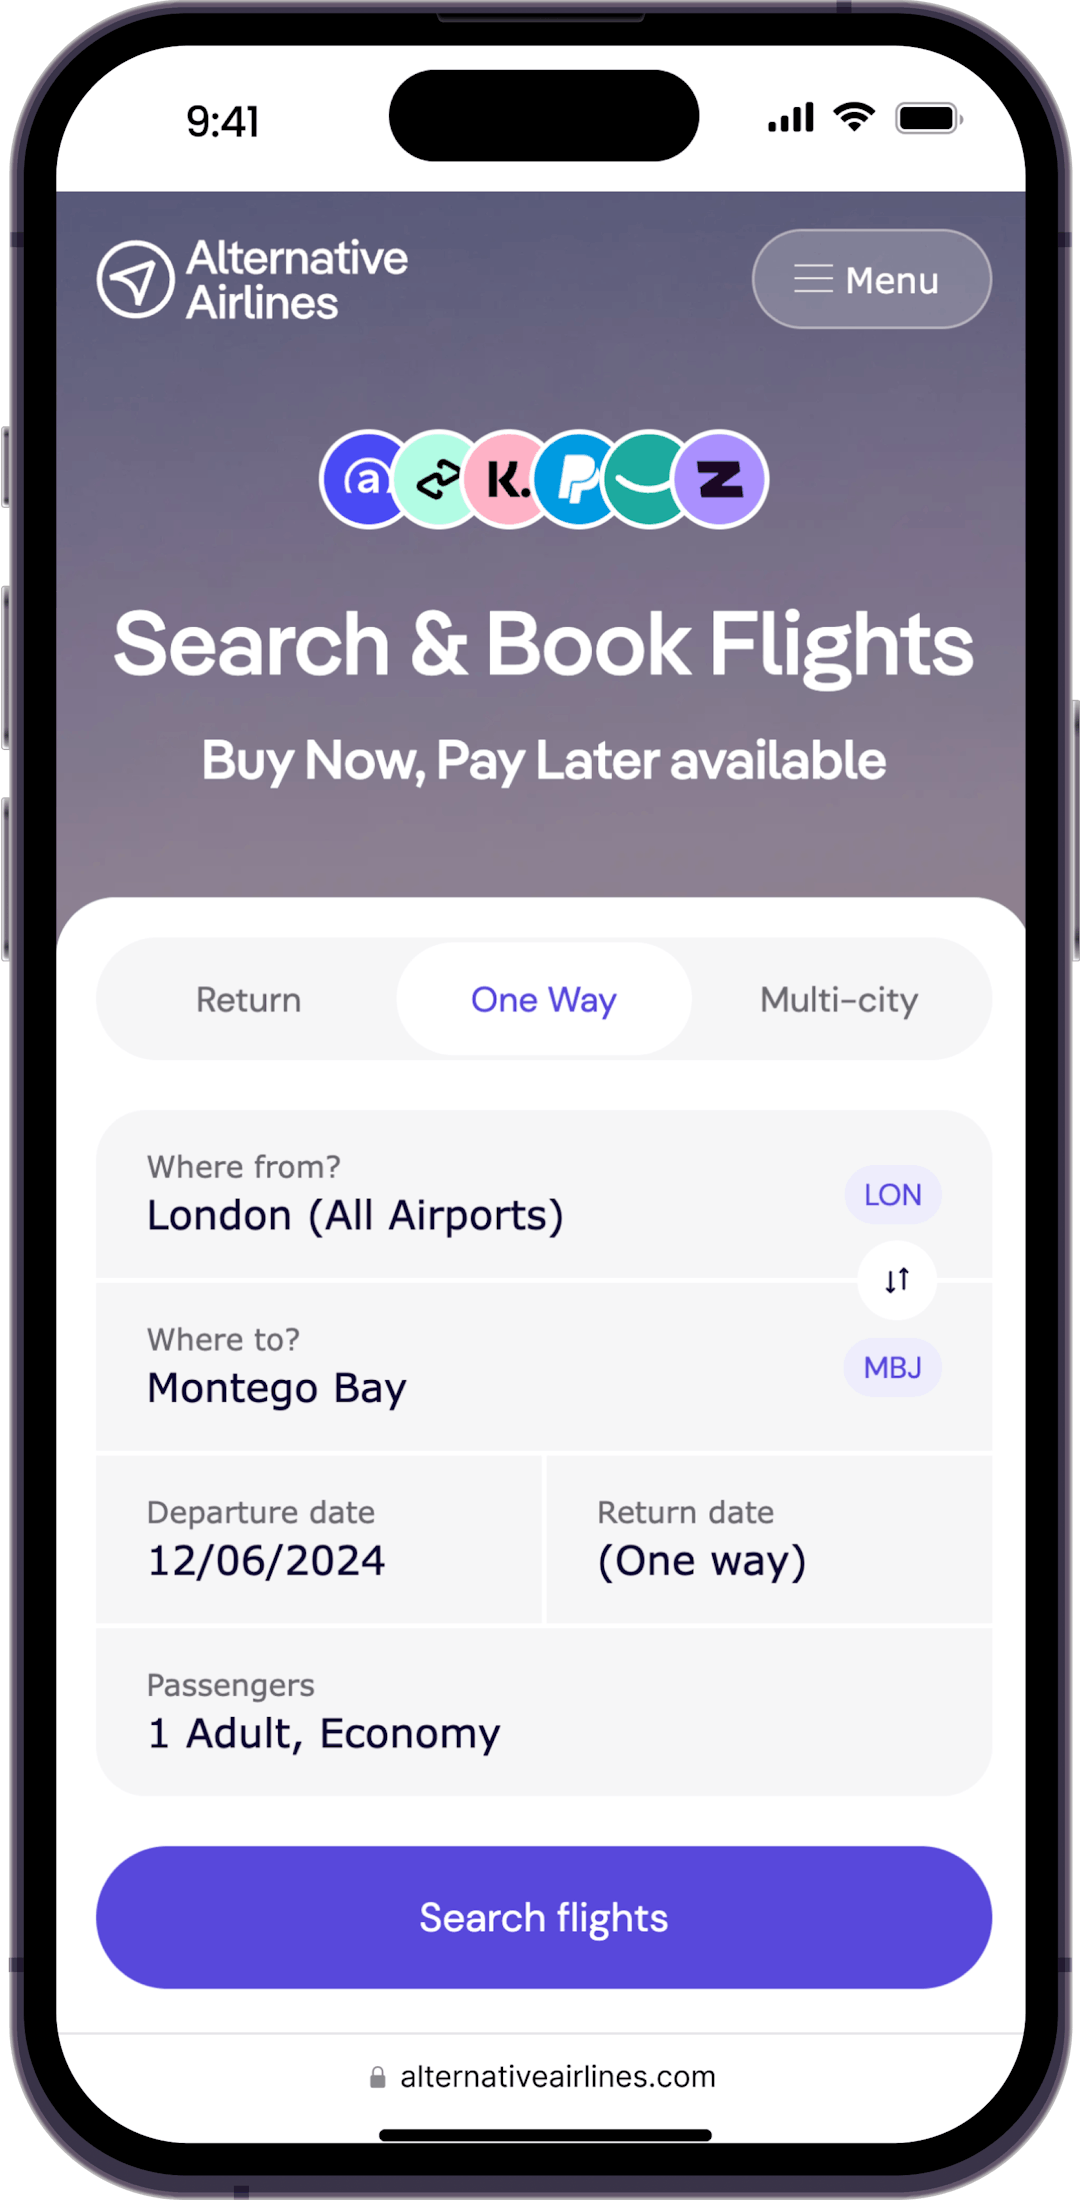 Step 1 - search for flights